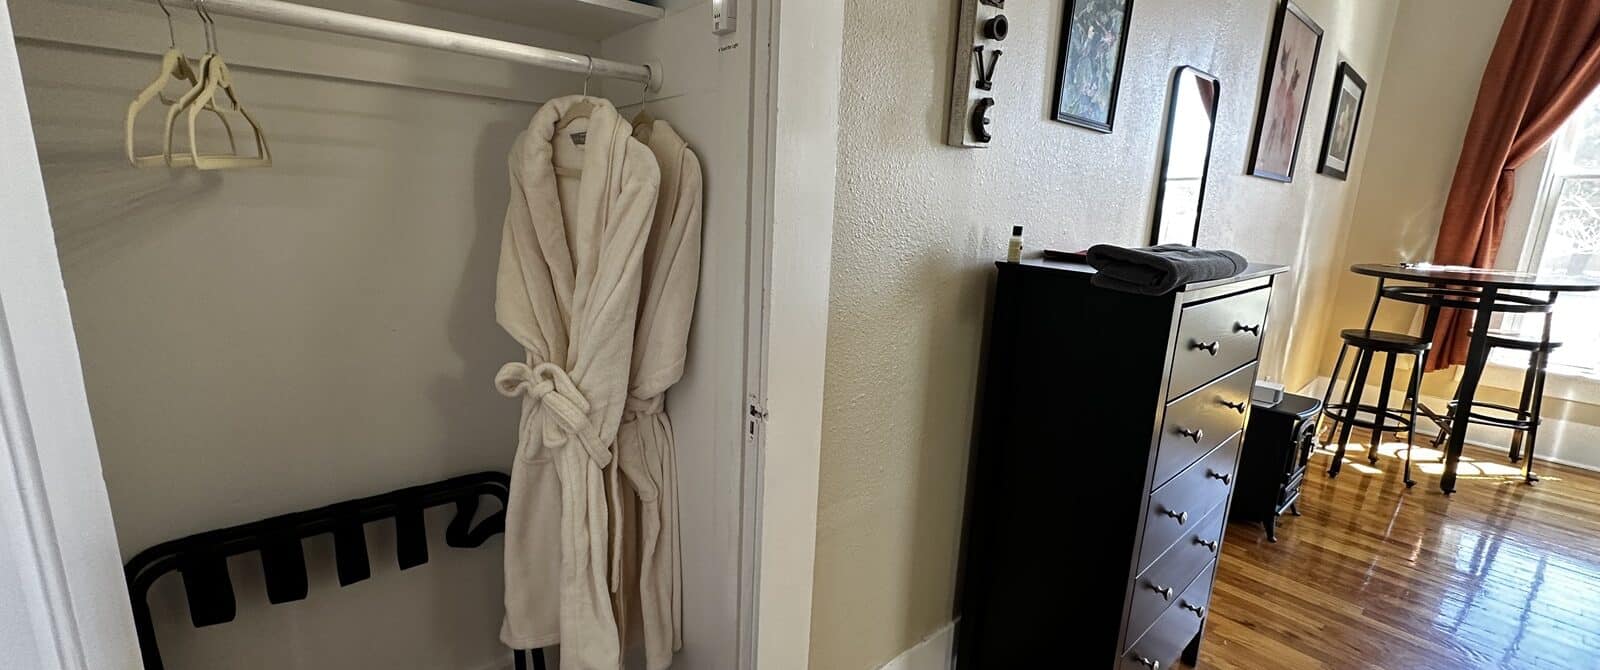 interior view of a bedroom showing a closet with two robes and a blanket, a dresser, and art.